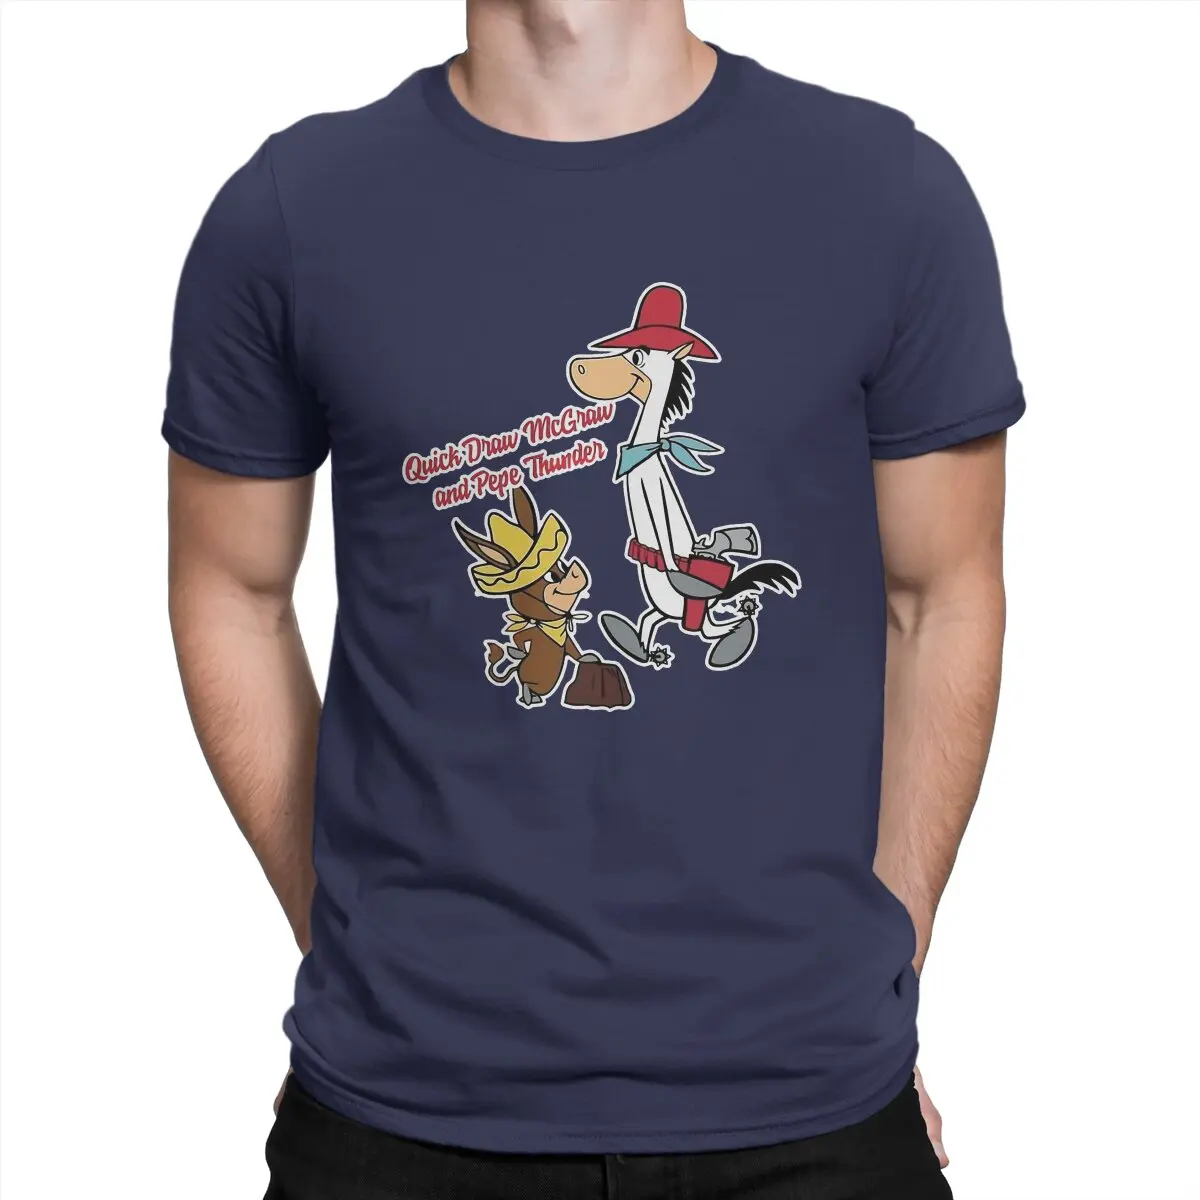 

Cute Poster T-Shirts Men Quick Draw Mcgraw Vintage 100% Cotton Tees Crewneck Short Sleeve T Shirt Birthday Gift Tops